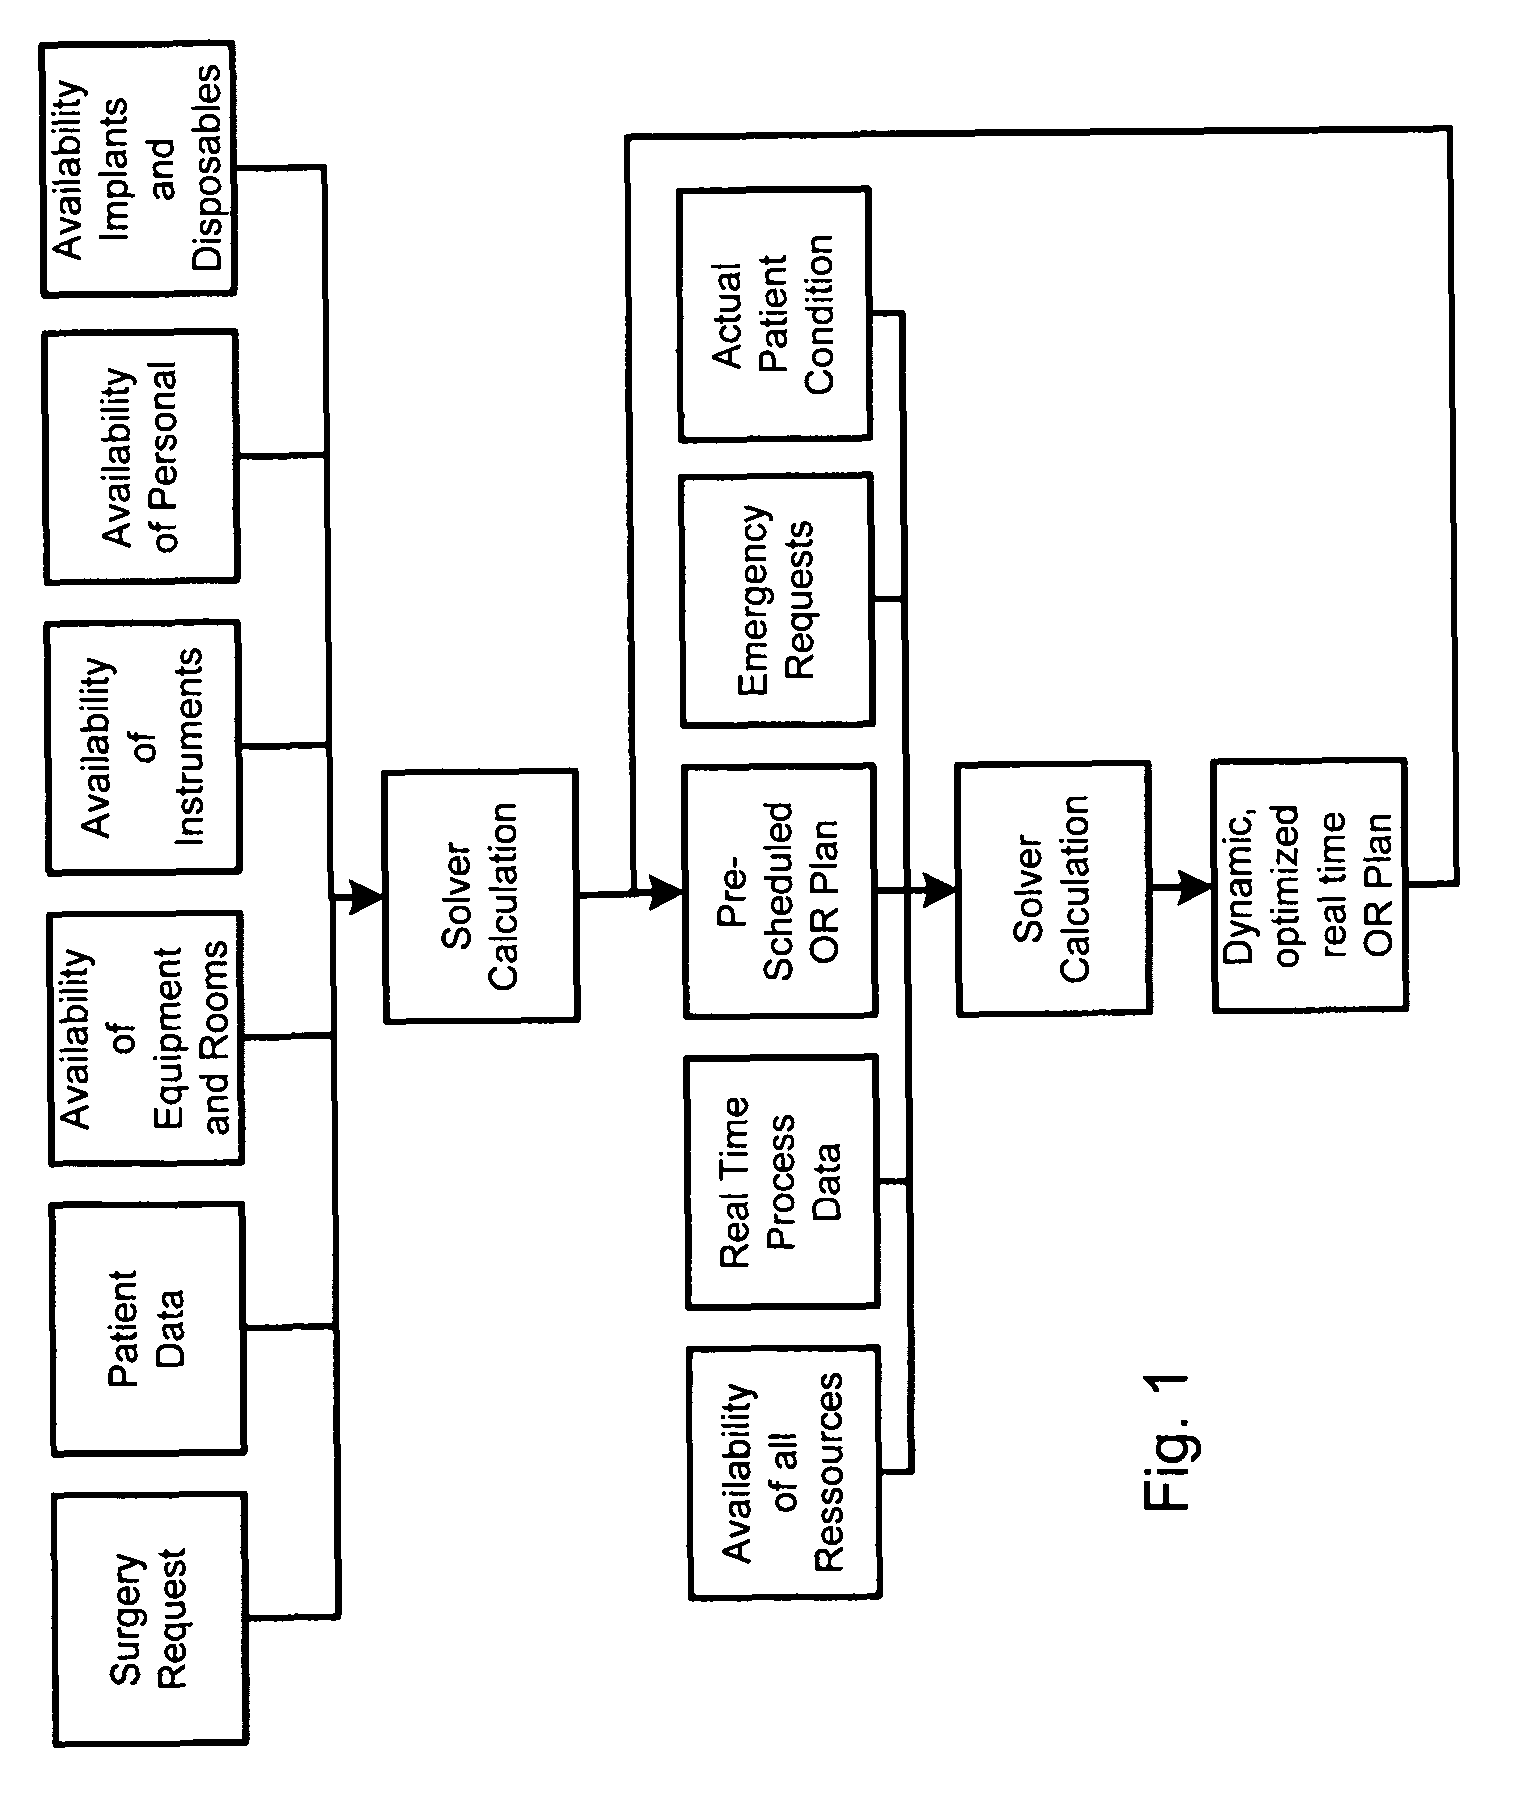 Method and system for management of operating-room resources